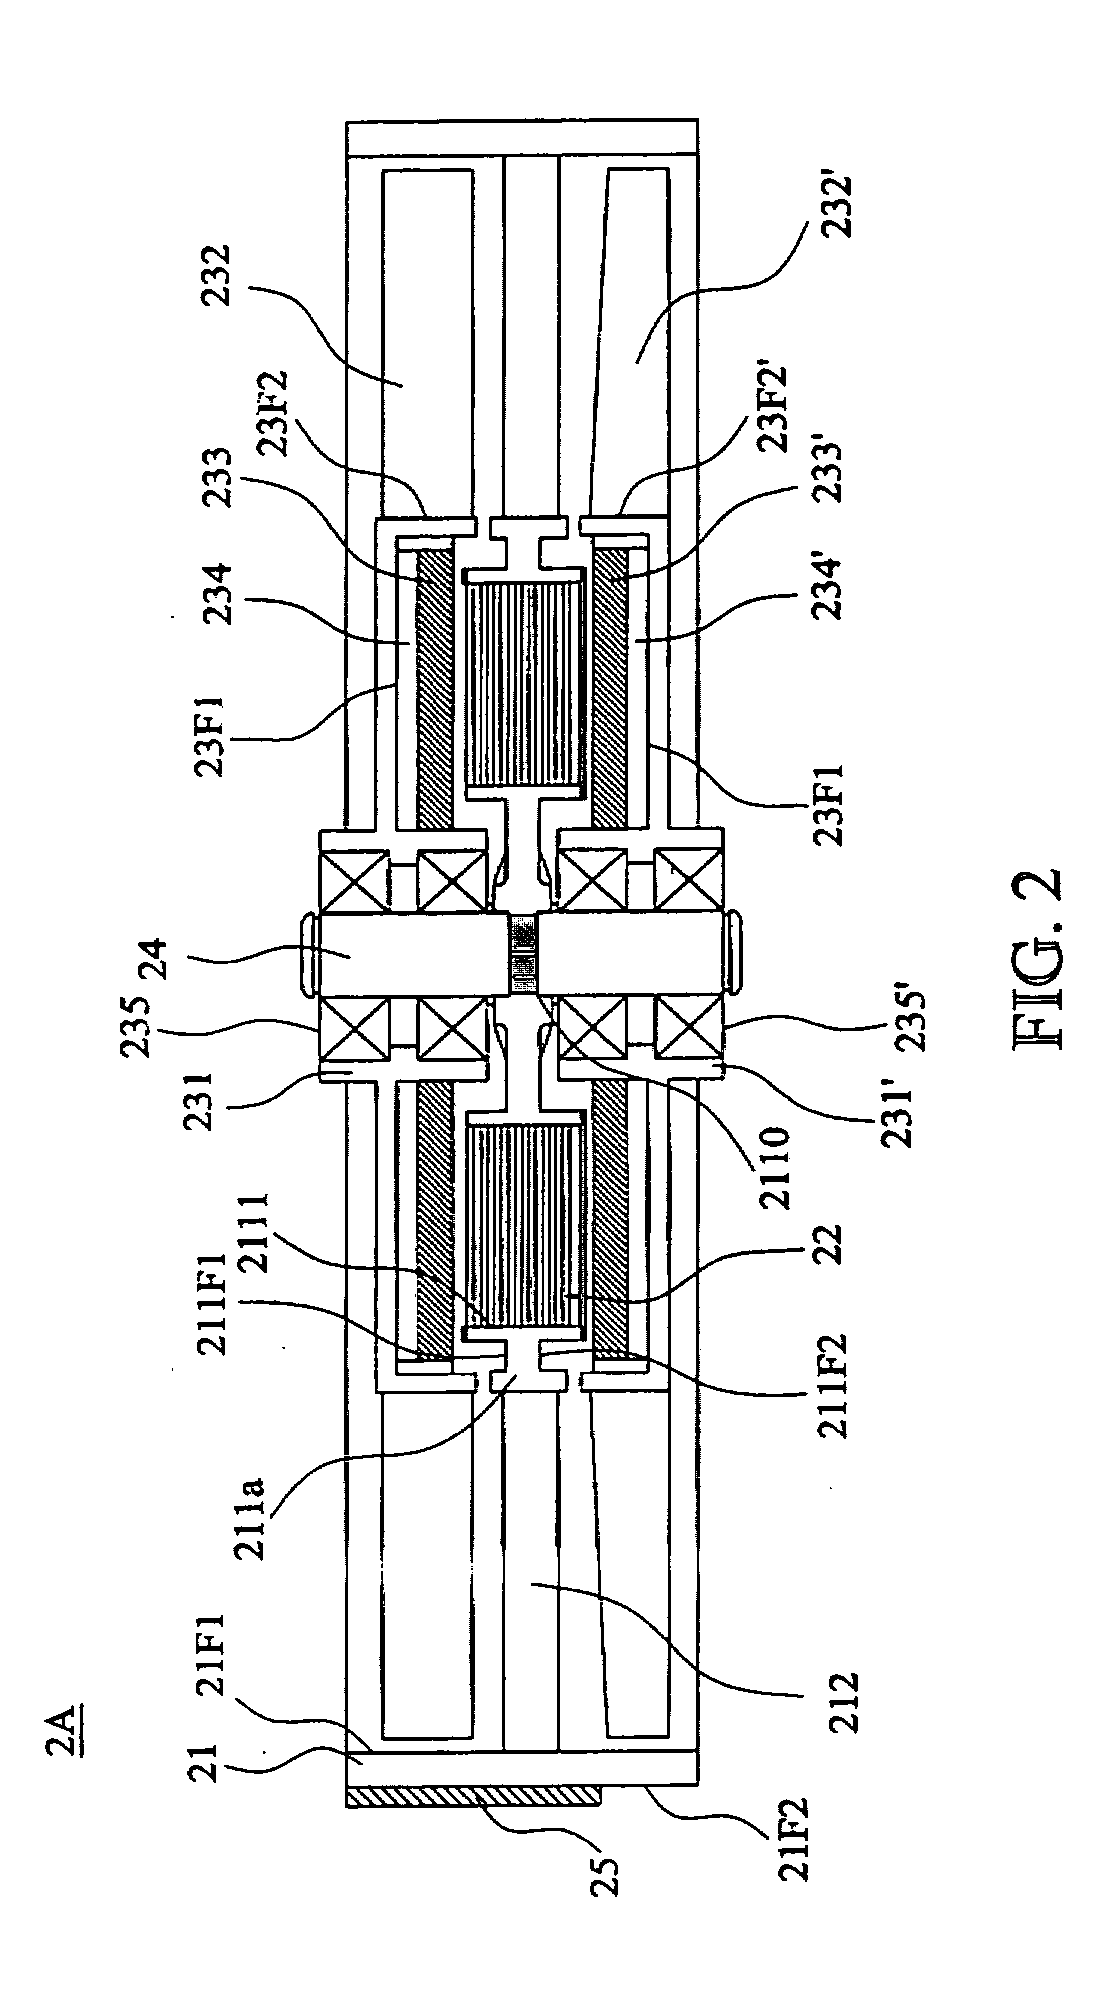 Three-phase opposite rotating motor and fan